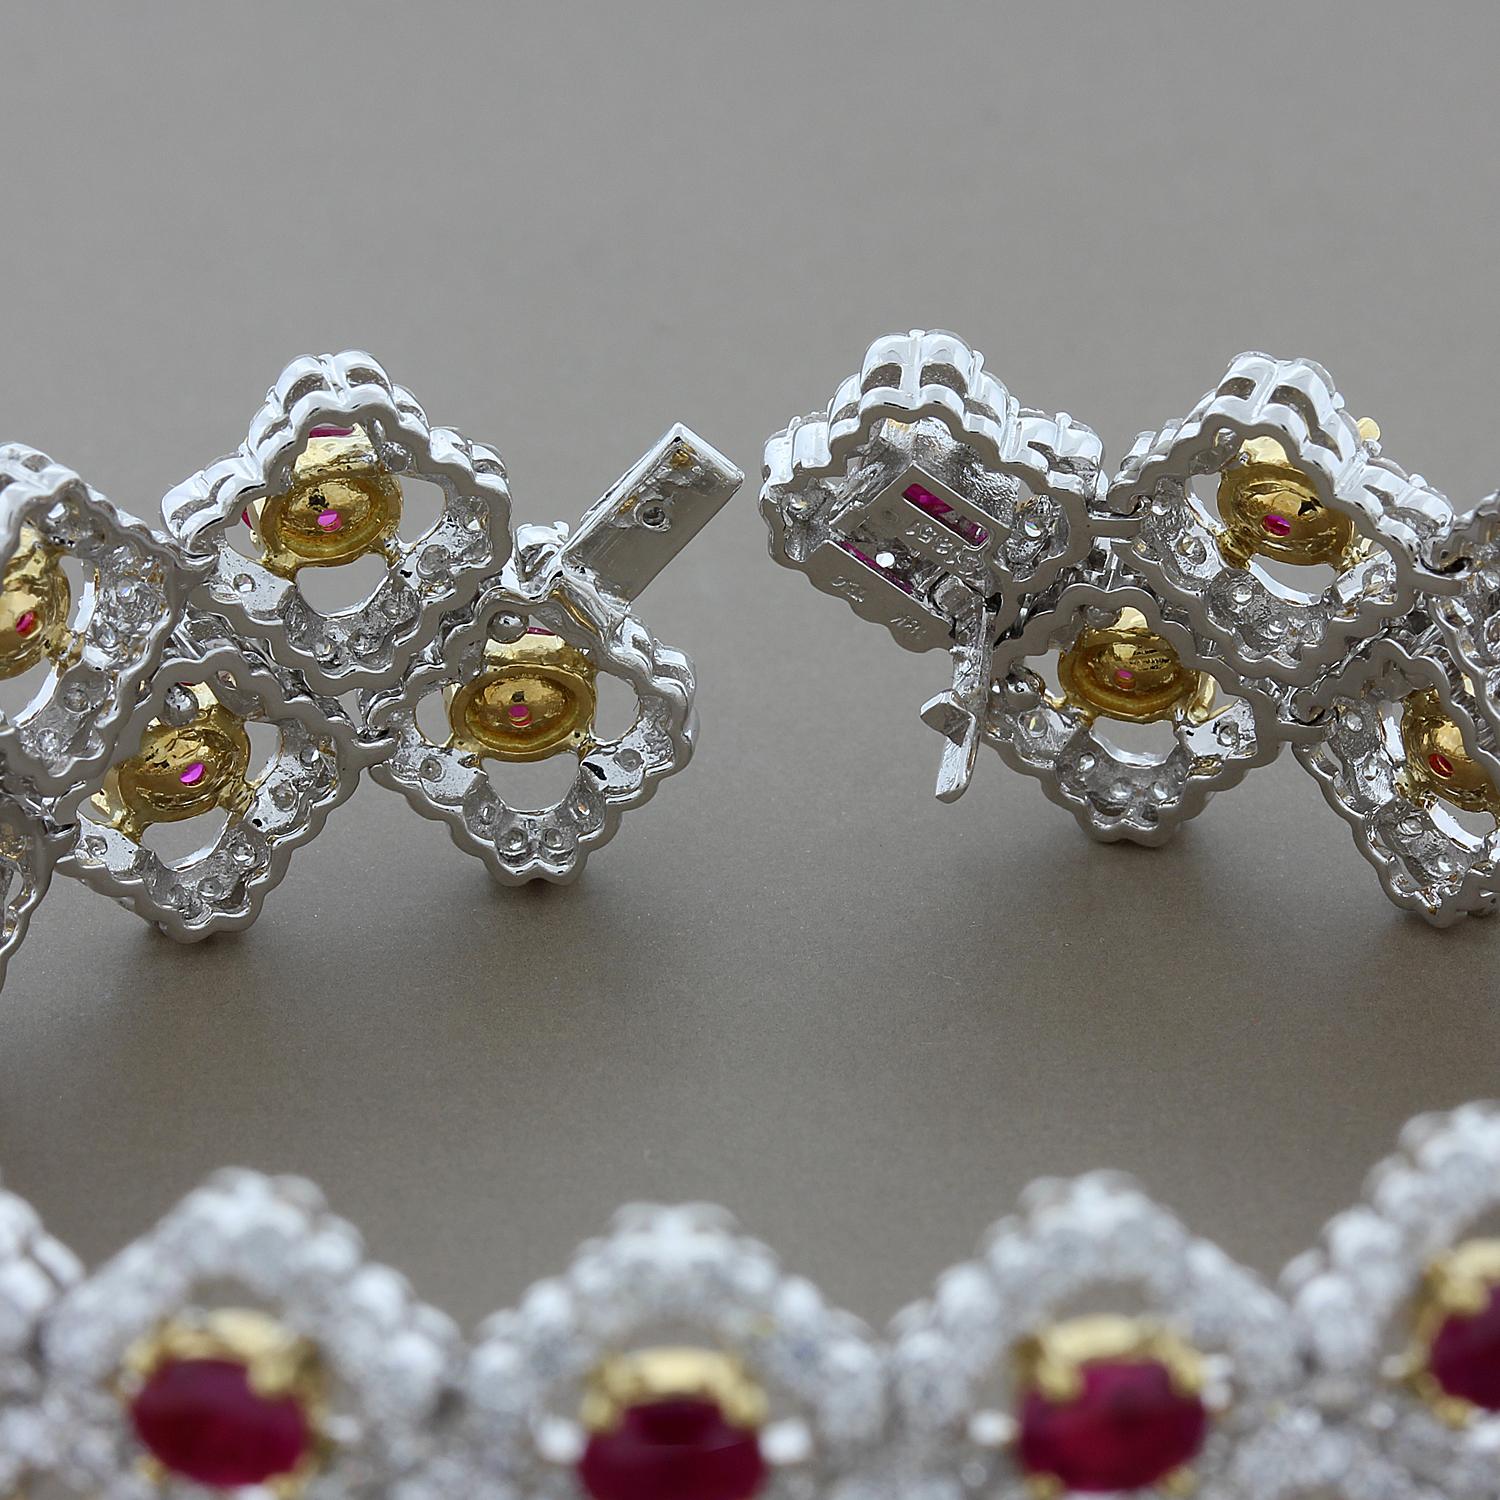 A luxurious bracelet featuring 13.51 carats of fine vivid red rubies.  The oval cut rubies are set in 18K yellow gold. These exotic gemstones are accented by 9.72 carats of sparkling round cut white diamonds set in 18K white gold. The bracelet has a